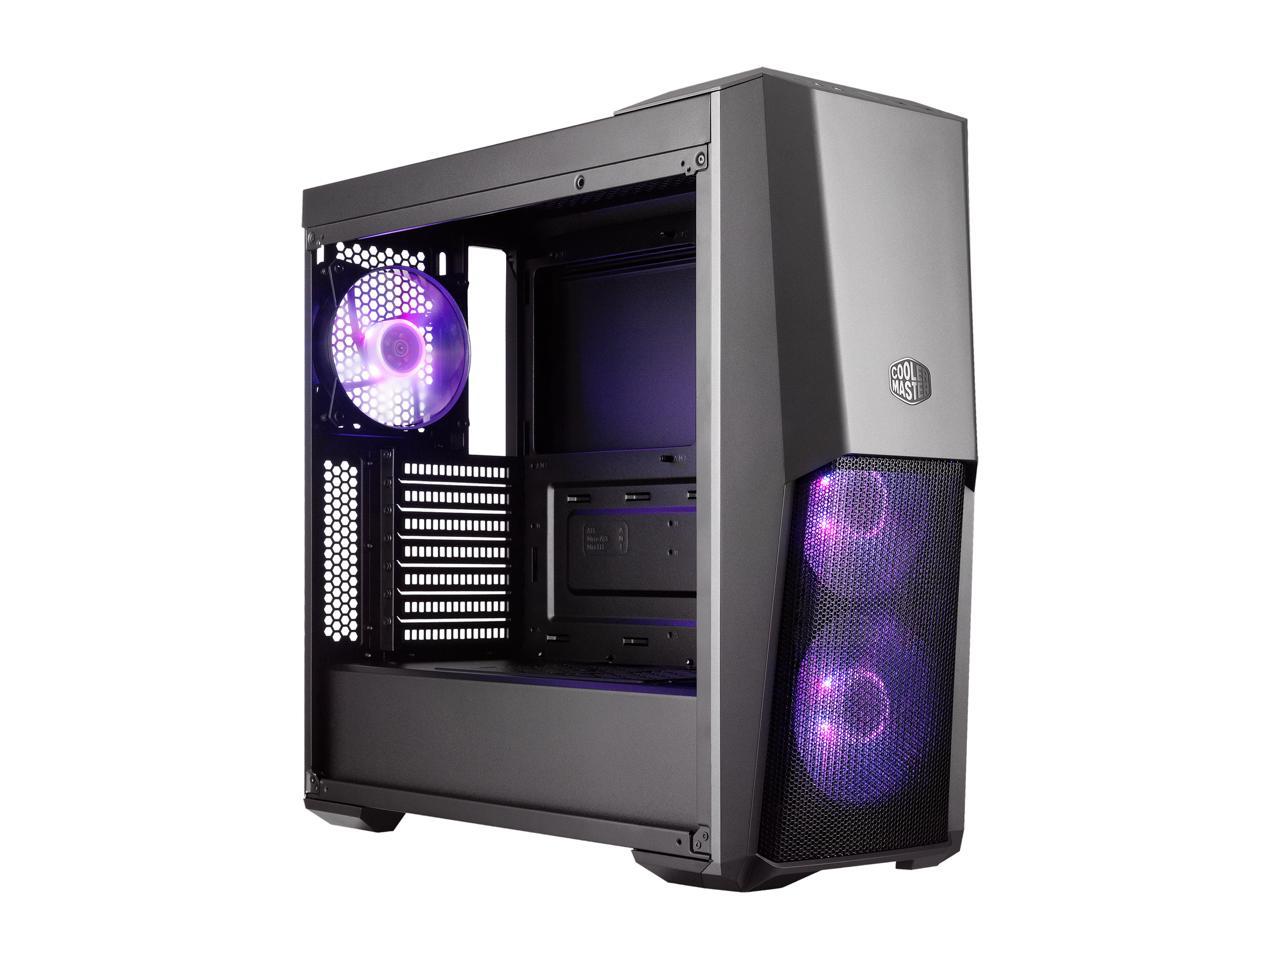 Cooler Master MasterBox MB500 ATX Mid-Tower w/ Front Semi-Meshed Ventilation, Tempered Glass Side Panel & 3 x 120mm RGB Fans